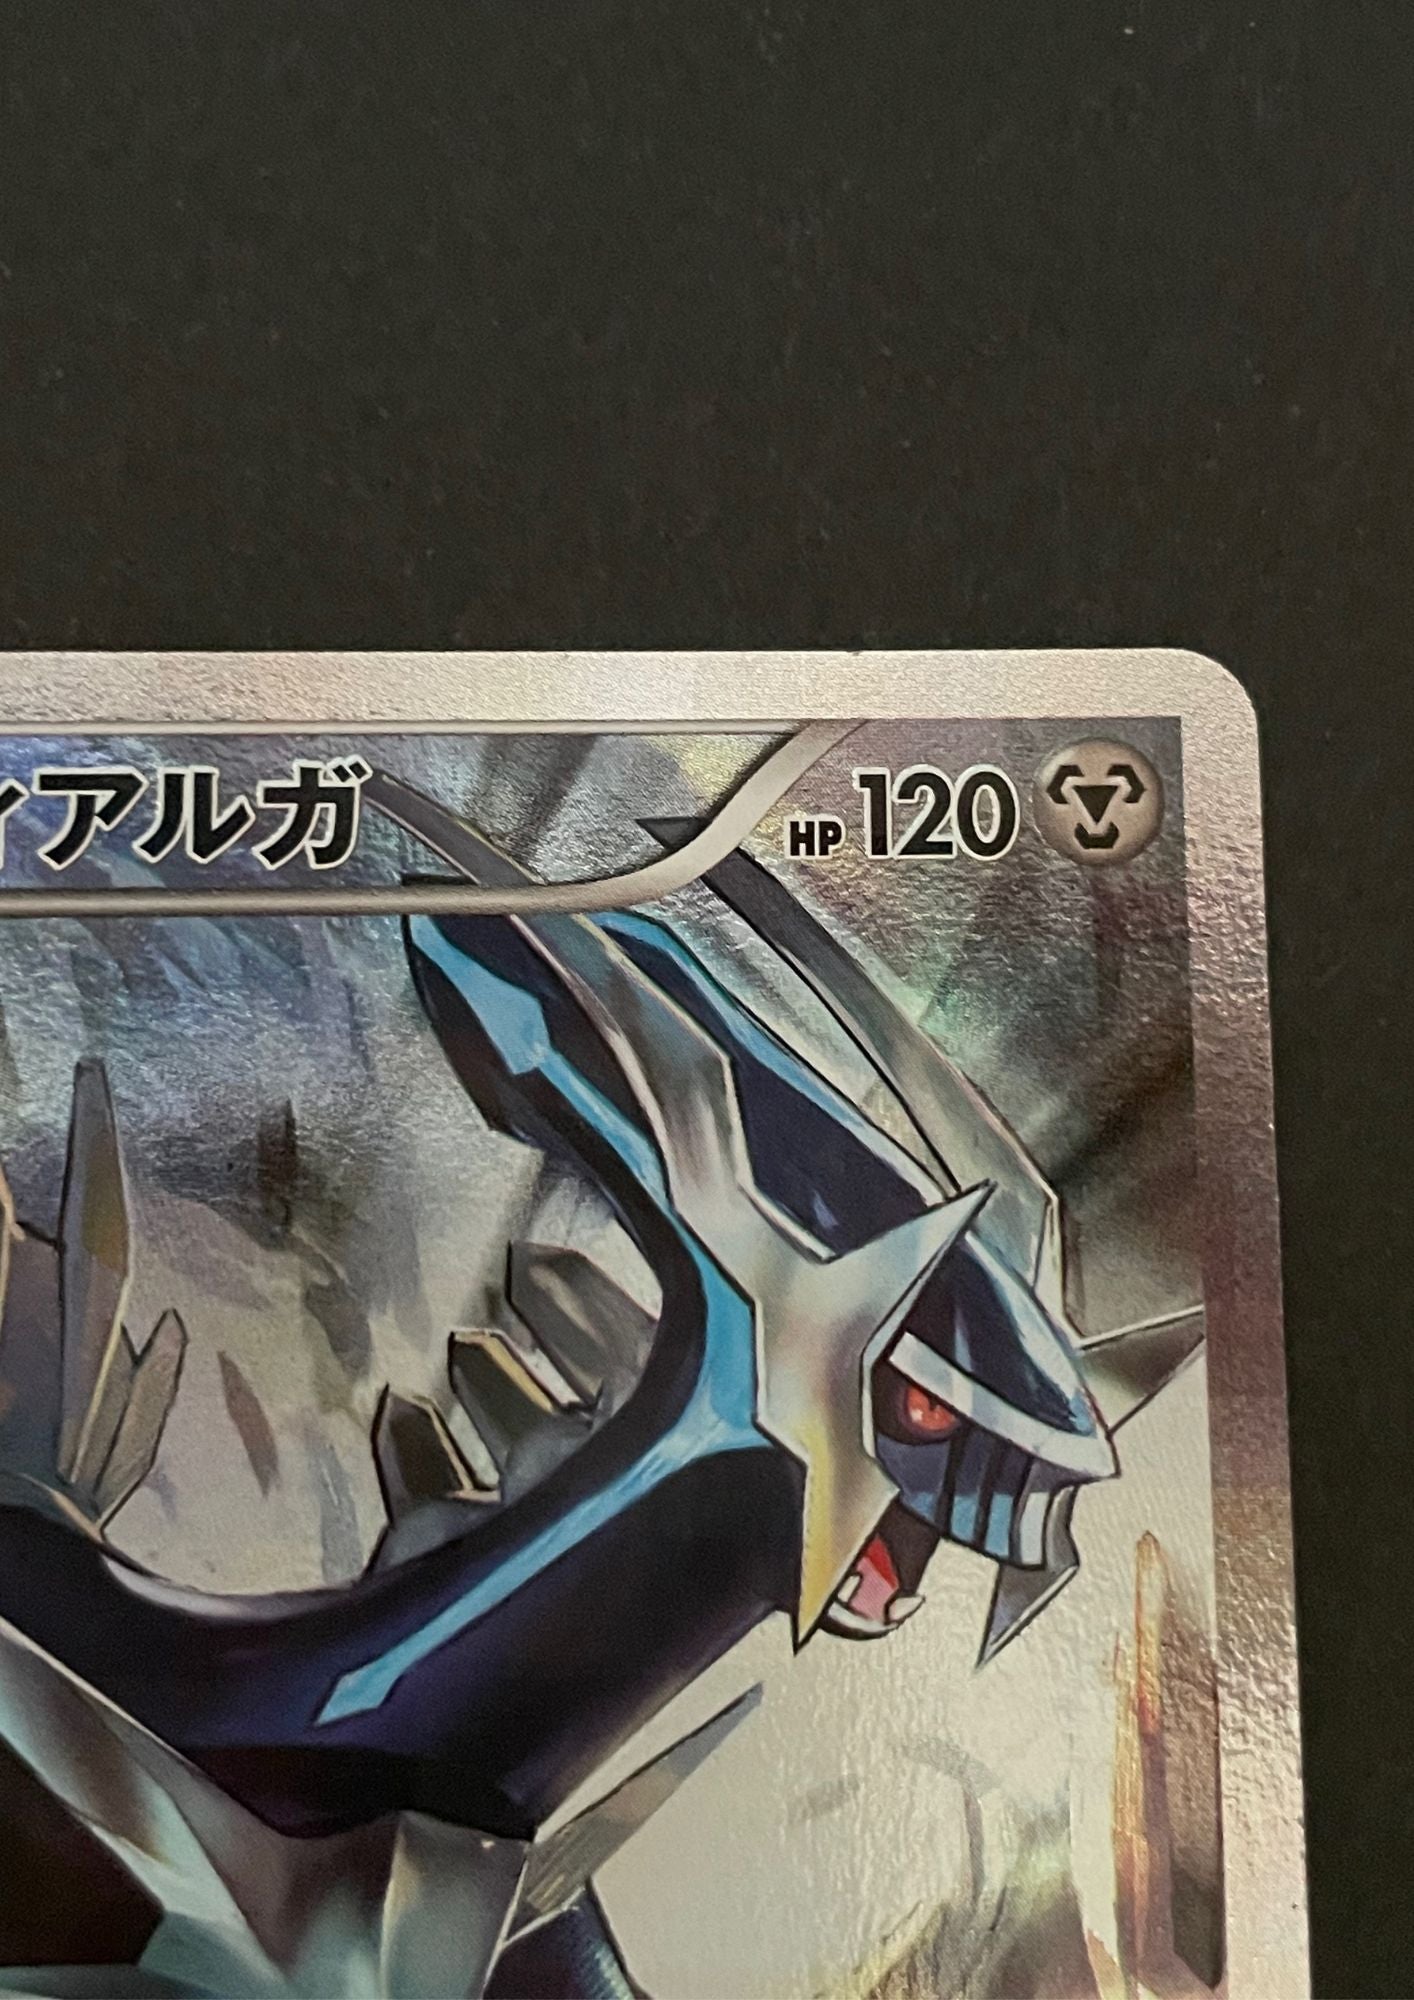 legendary pokemon x and y cards